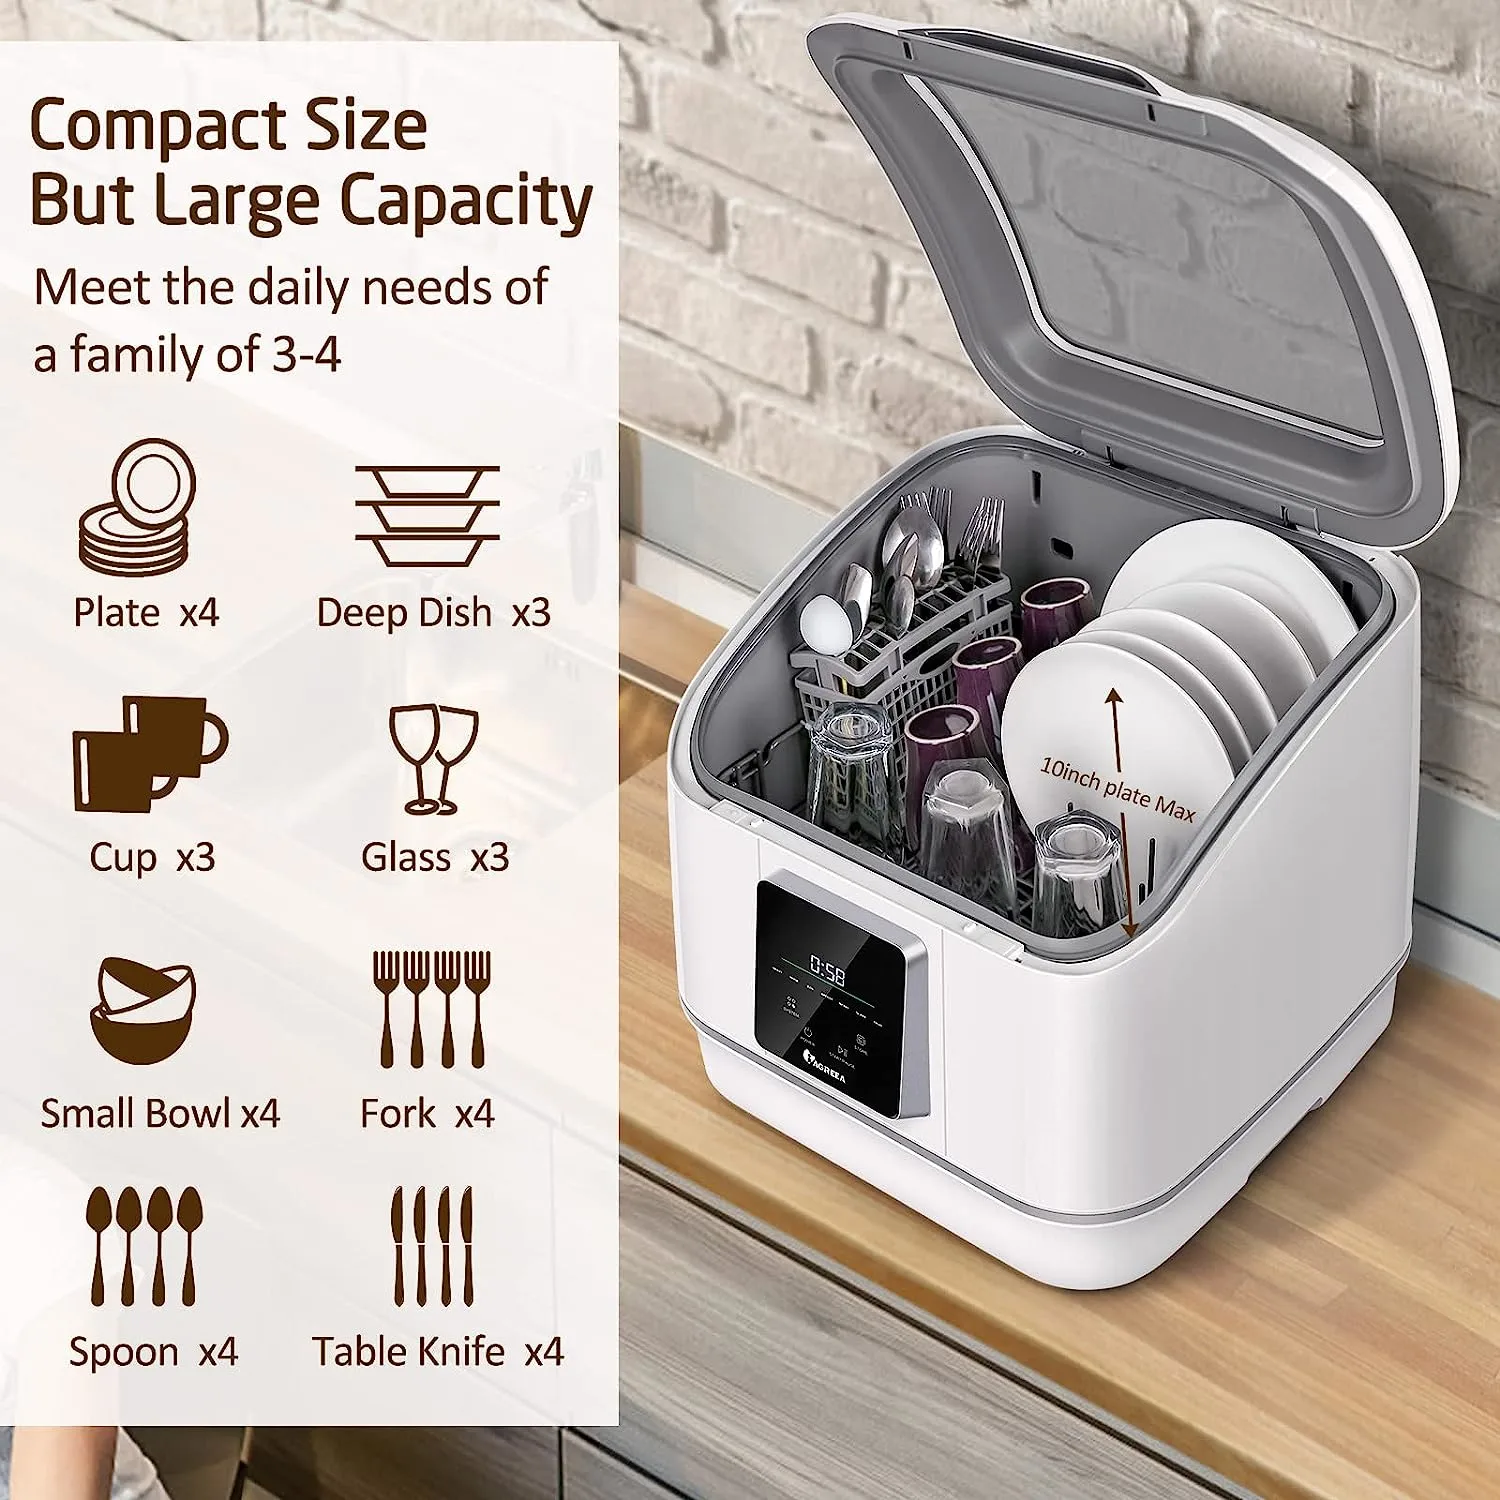 IAGREEA Portable Countertop Dishwasher, No Hookup Needed, Compact Dishwasher With 5-Liter Built-in Water Tank,5 Programs, 360° Dual Spray